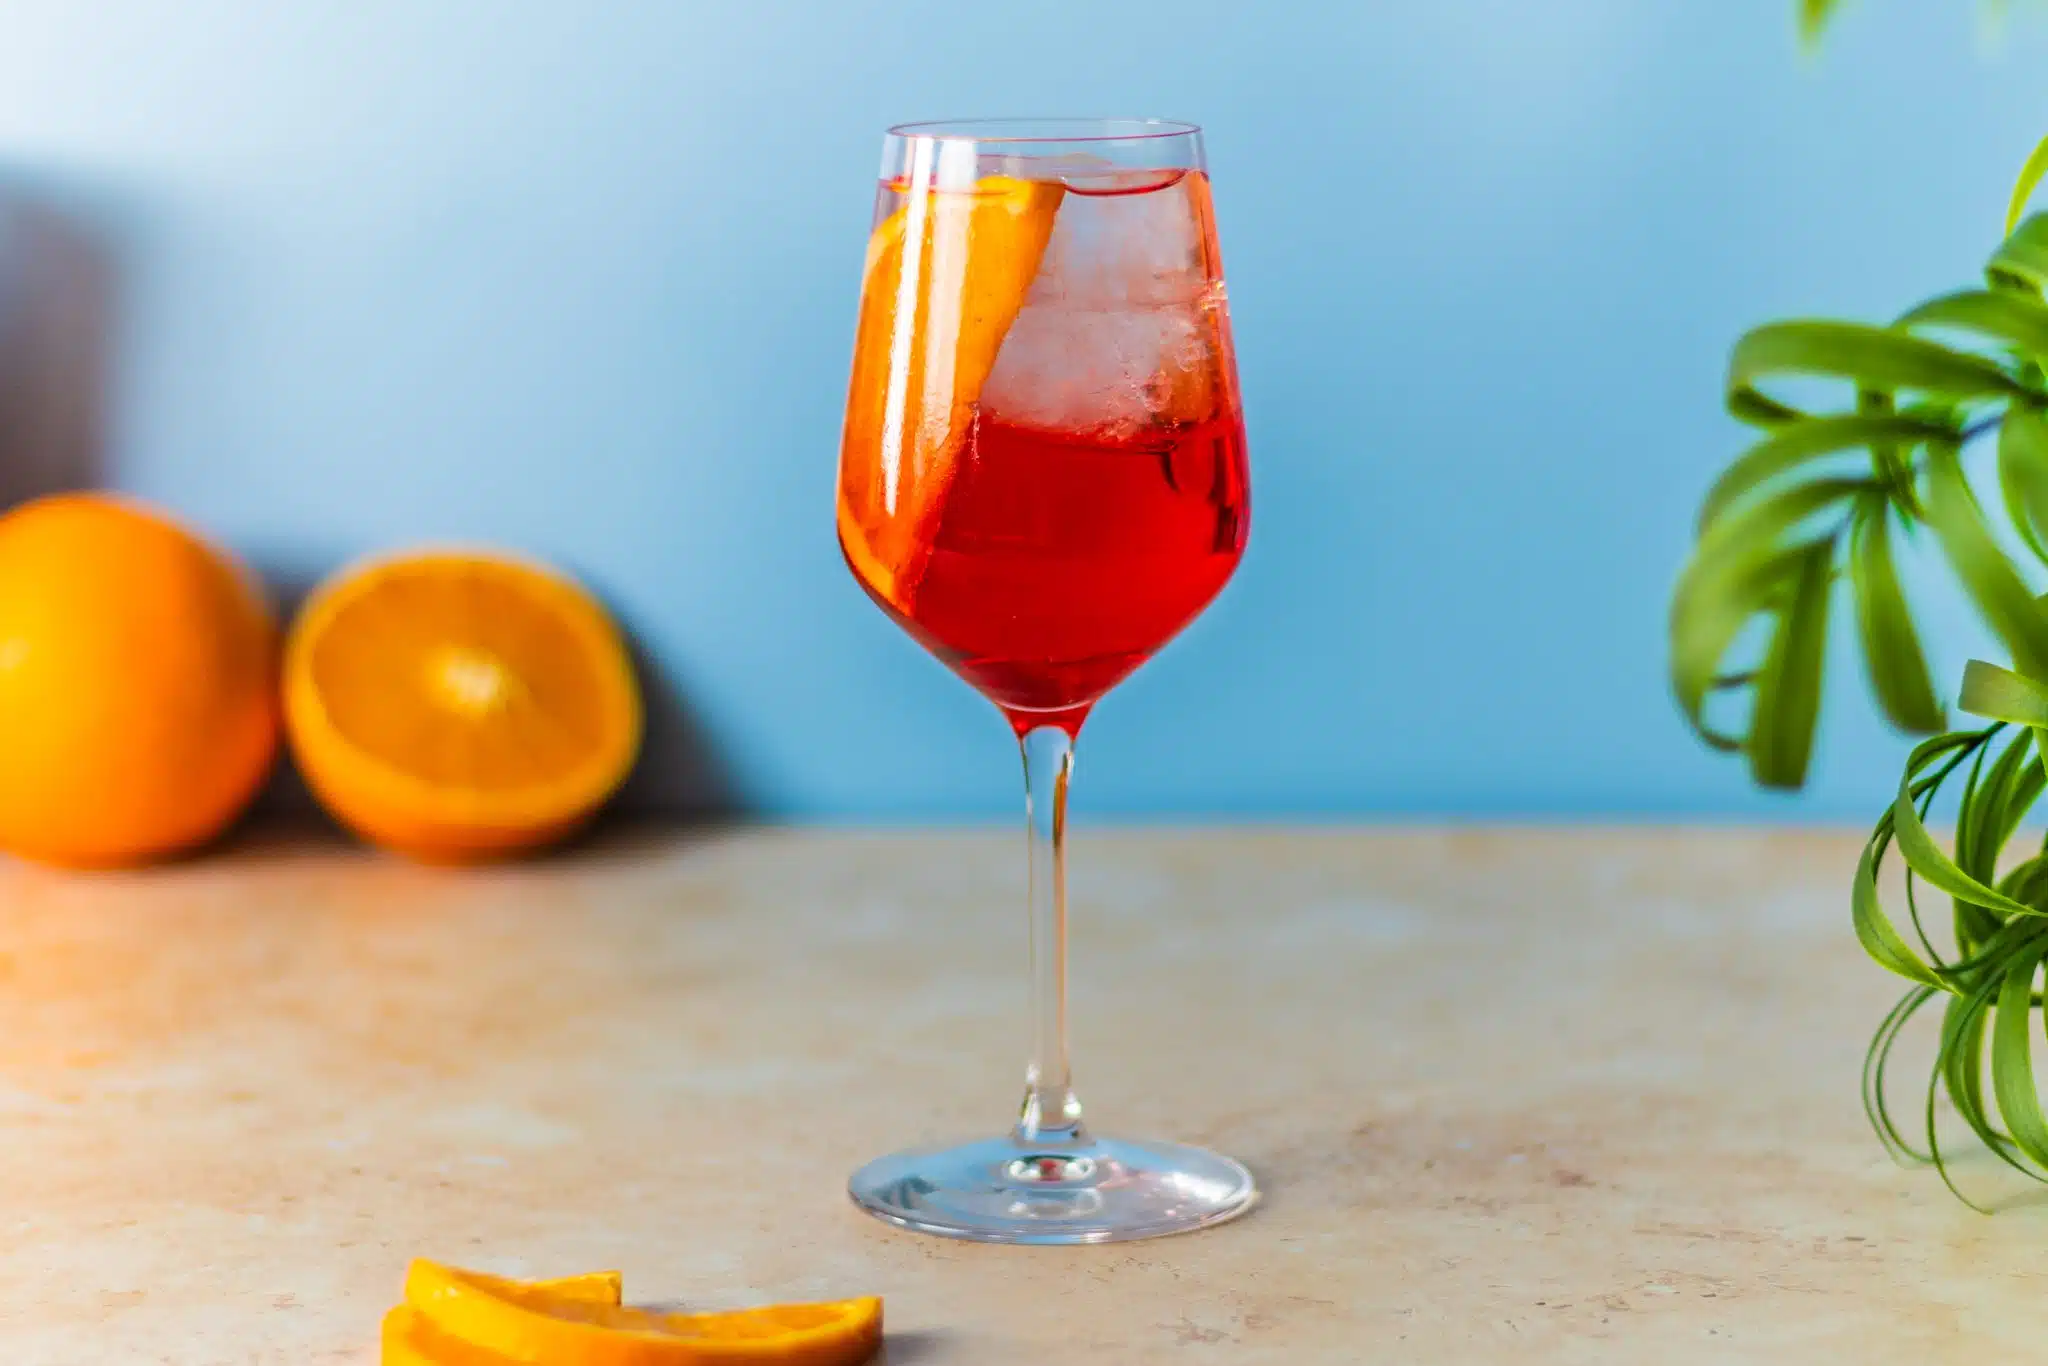 A side shot of a Campari Spritz cocktail in a wine glass on a beige table with orange slices in front and a half orange behind.